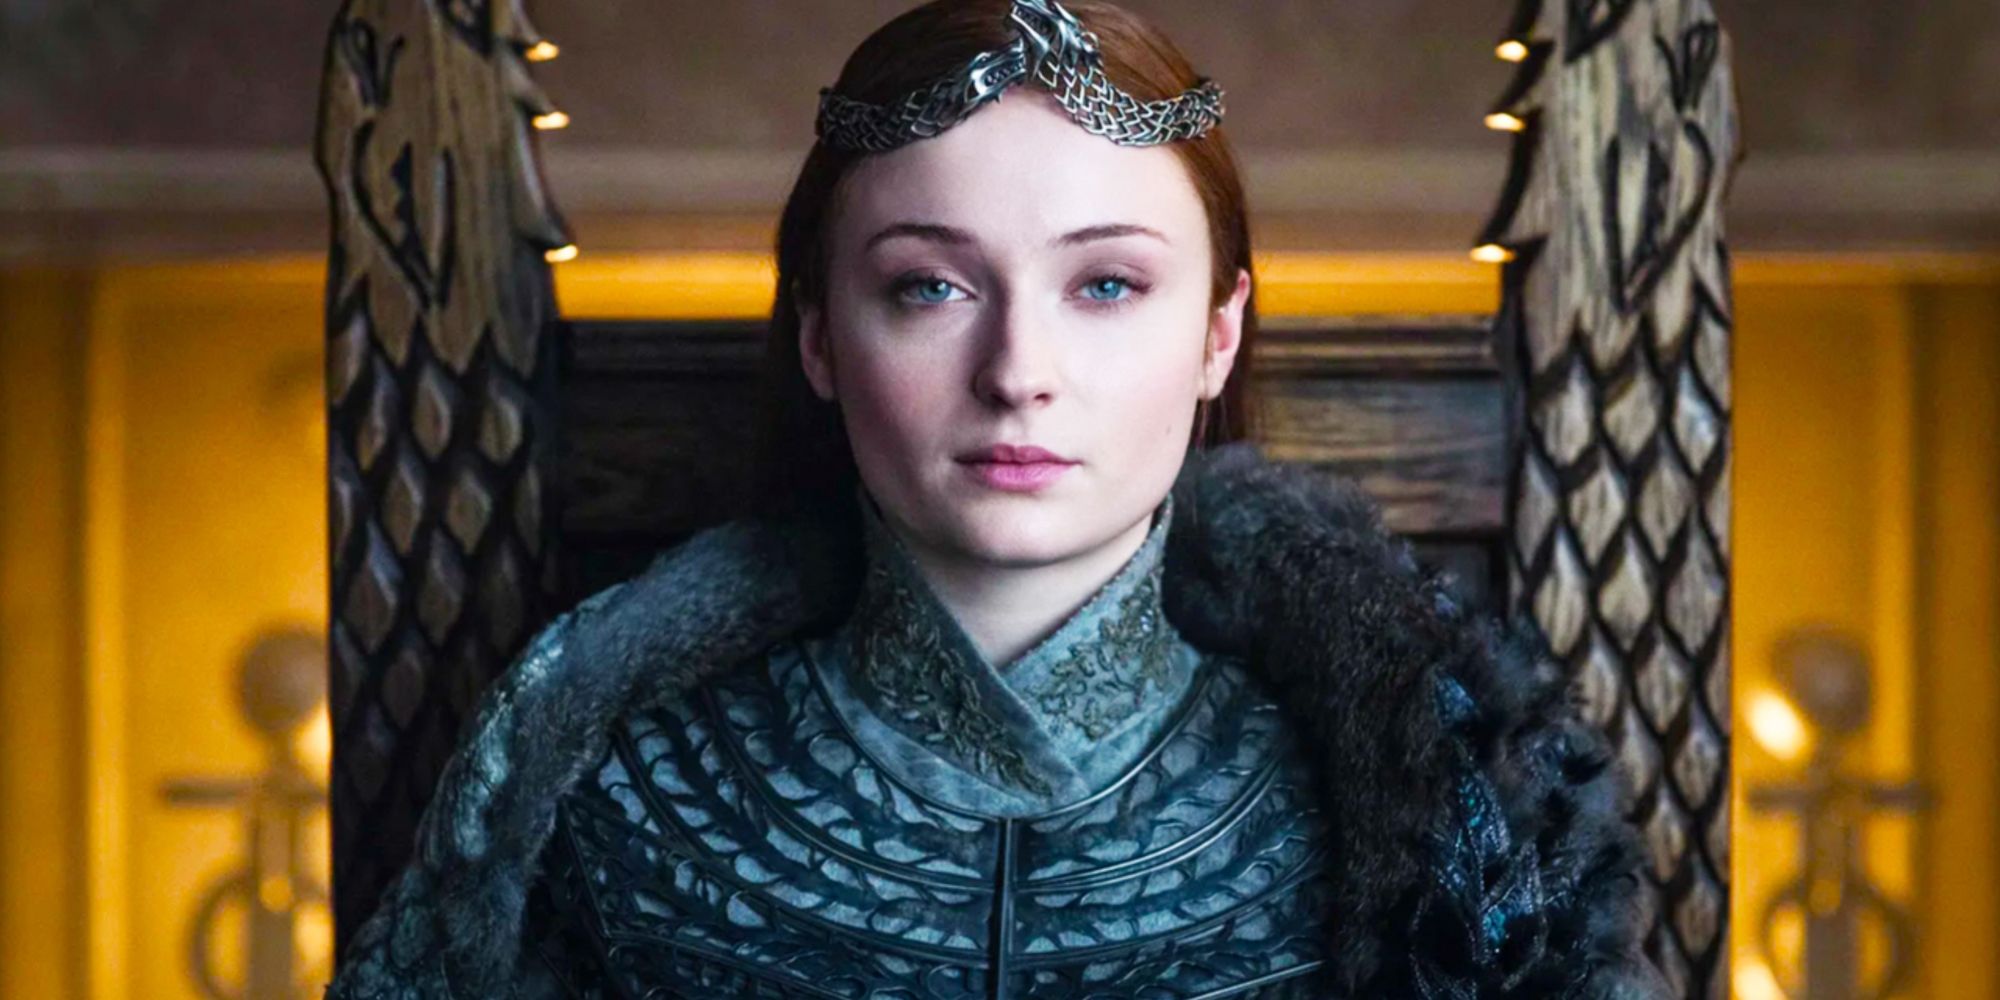 Sansa Stark crowned the Queen in the North